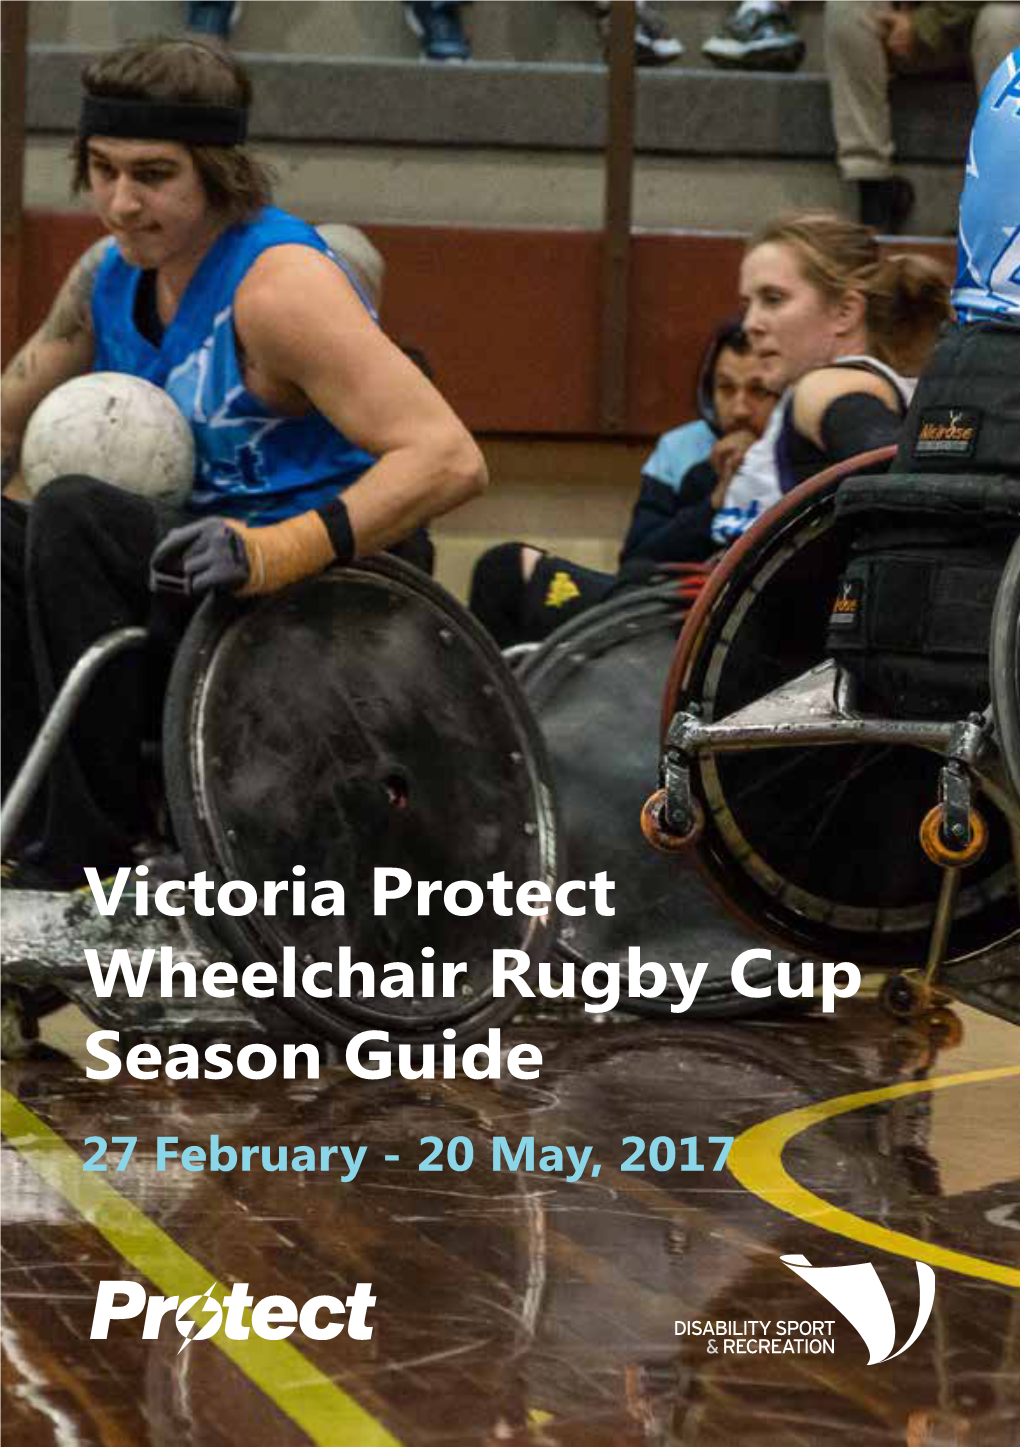 Victoria Protect Wheelchair Rugby Cup Season Guide 27 February - 20 May, 2017 Welcome to the 2017 Victoria Protect Wheelchair Rugby Cup